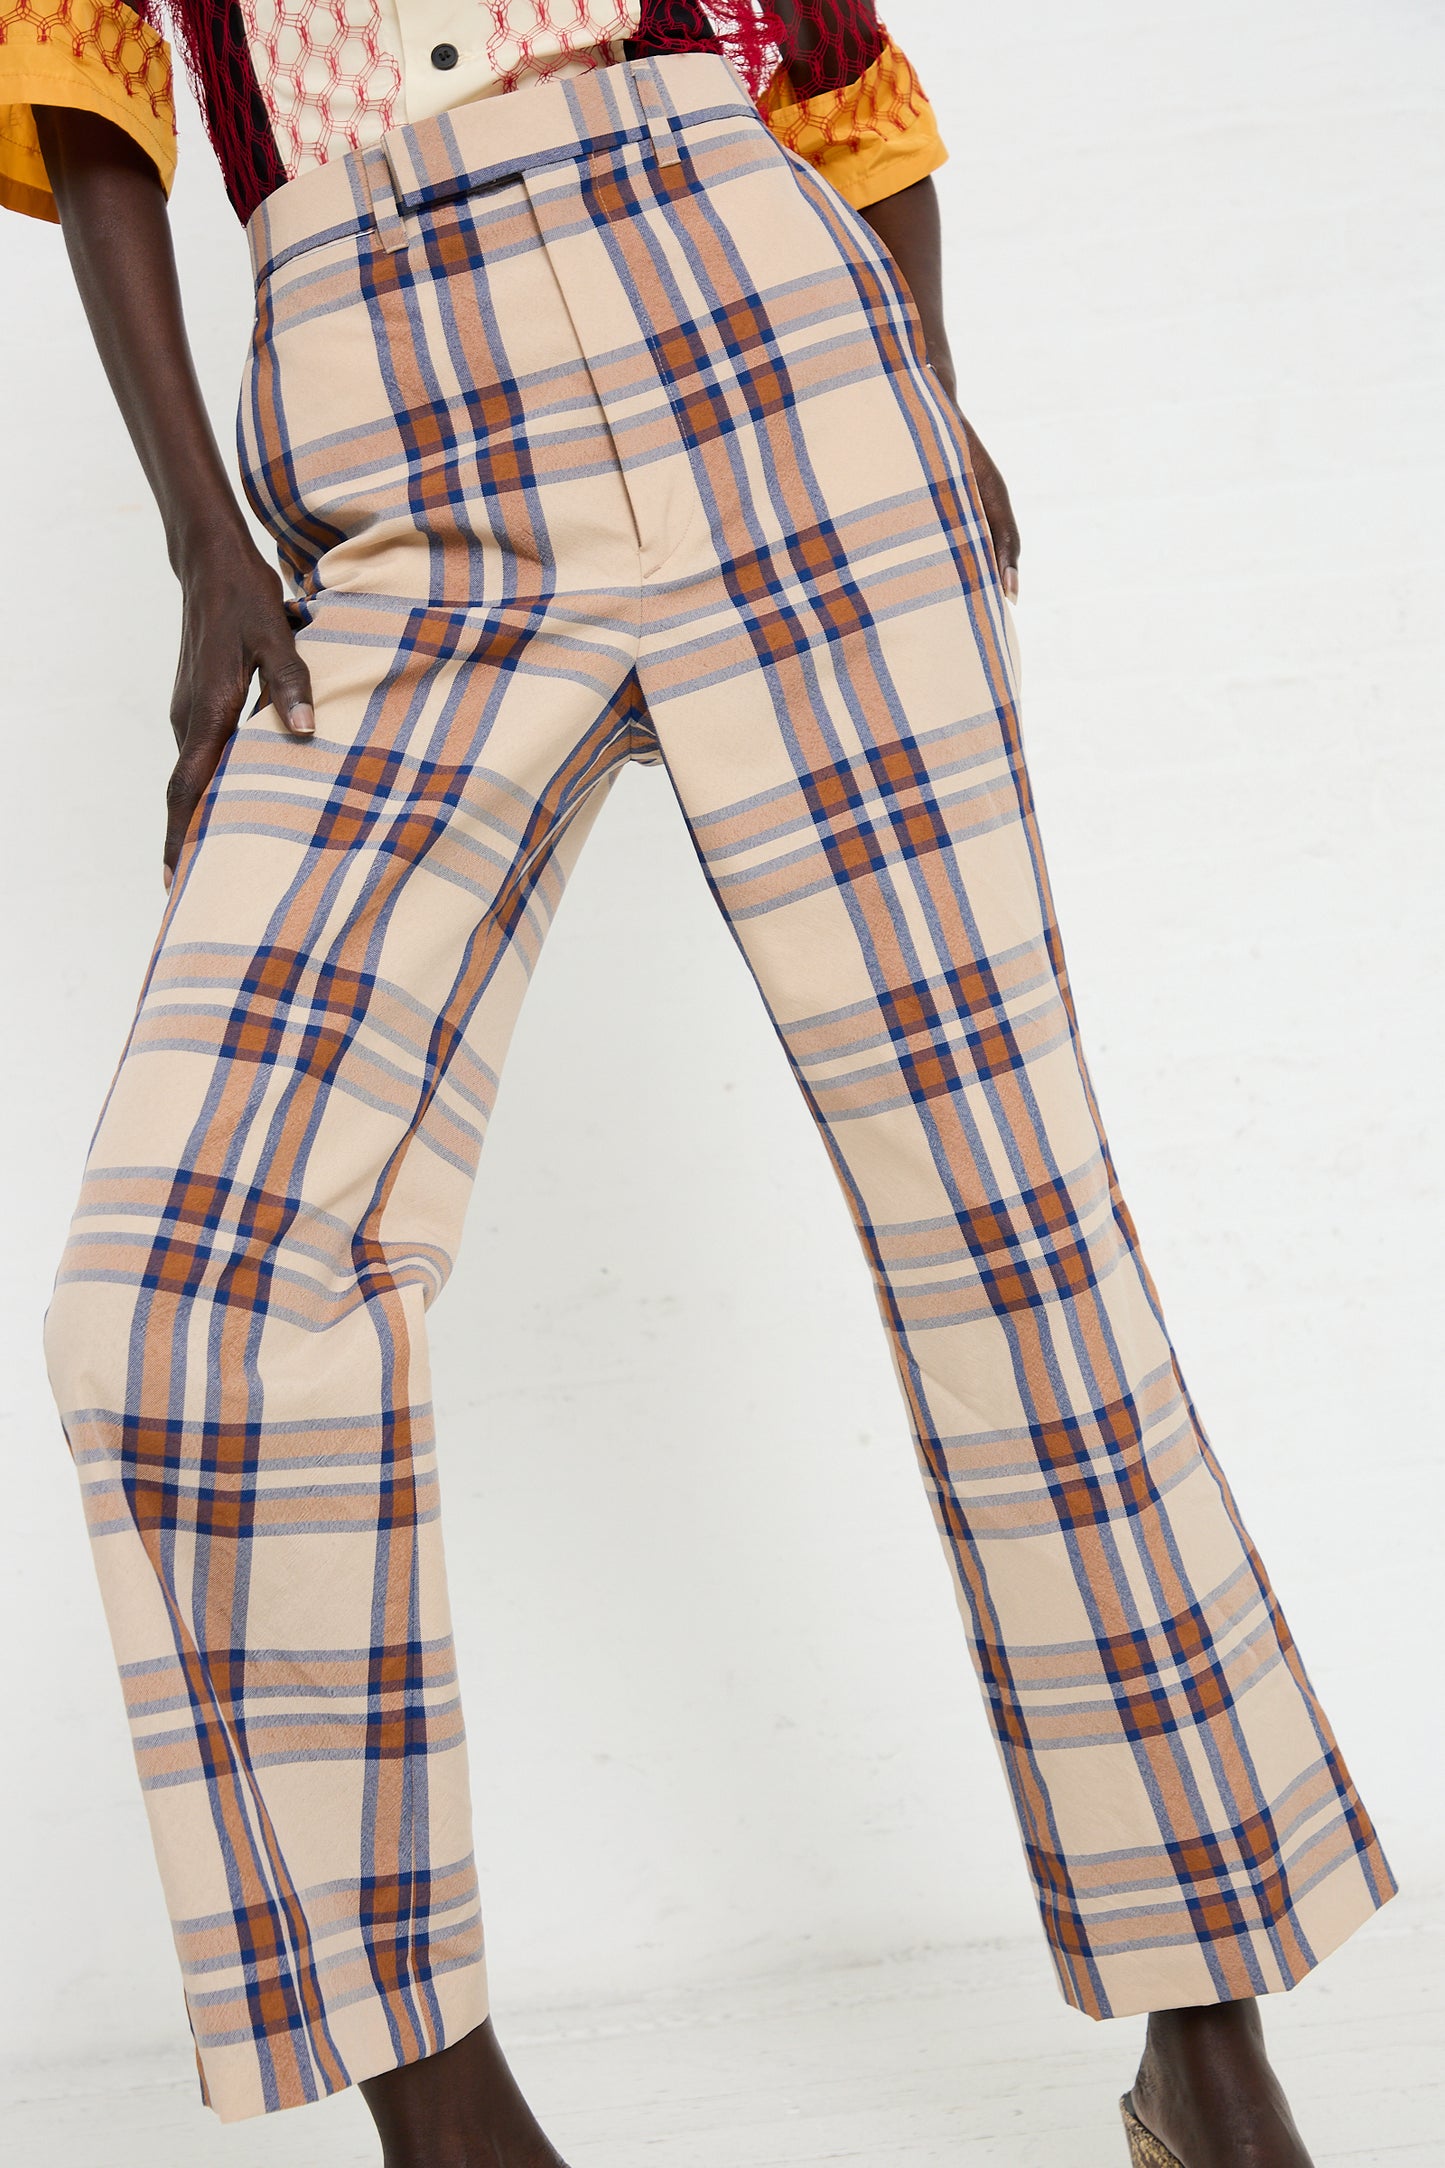 A person stands against a plain background, showcasing the TOGA ARCHIVES Wool Check Pant in Beige with a blue and red wool check plaid pattern. The lower body is visible in high-waisted trousers with slightly flared legs.